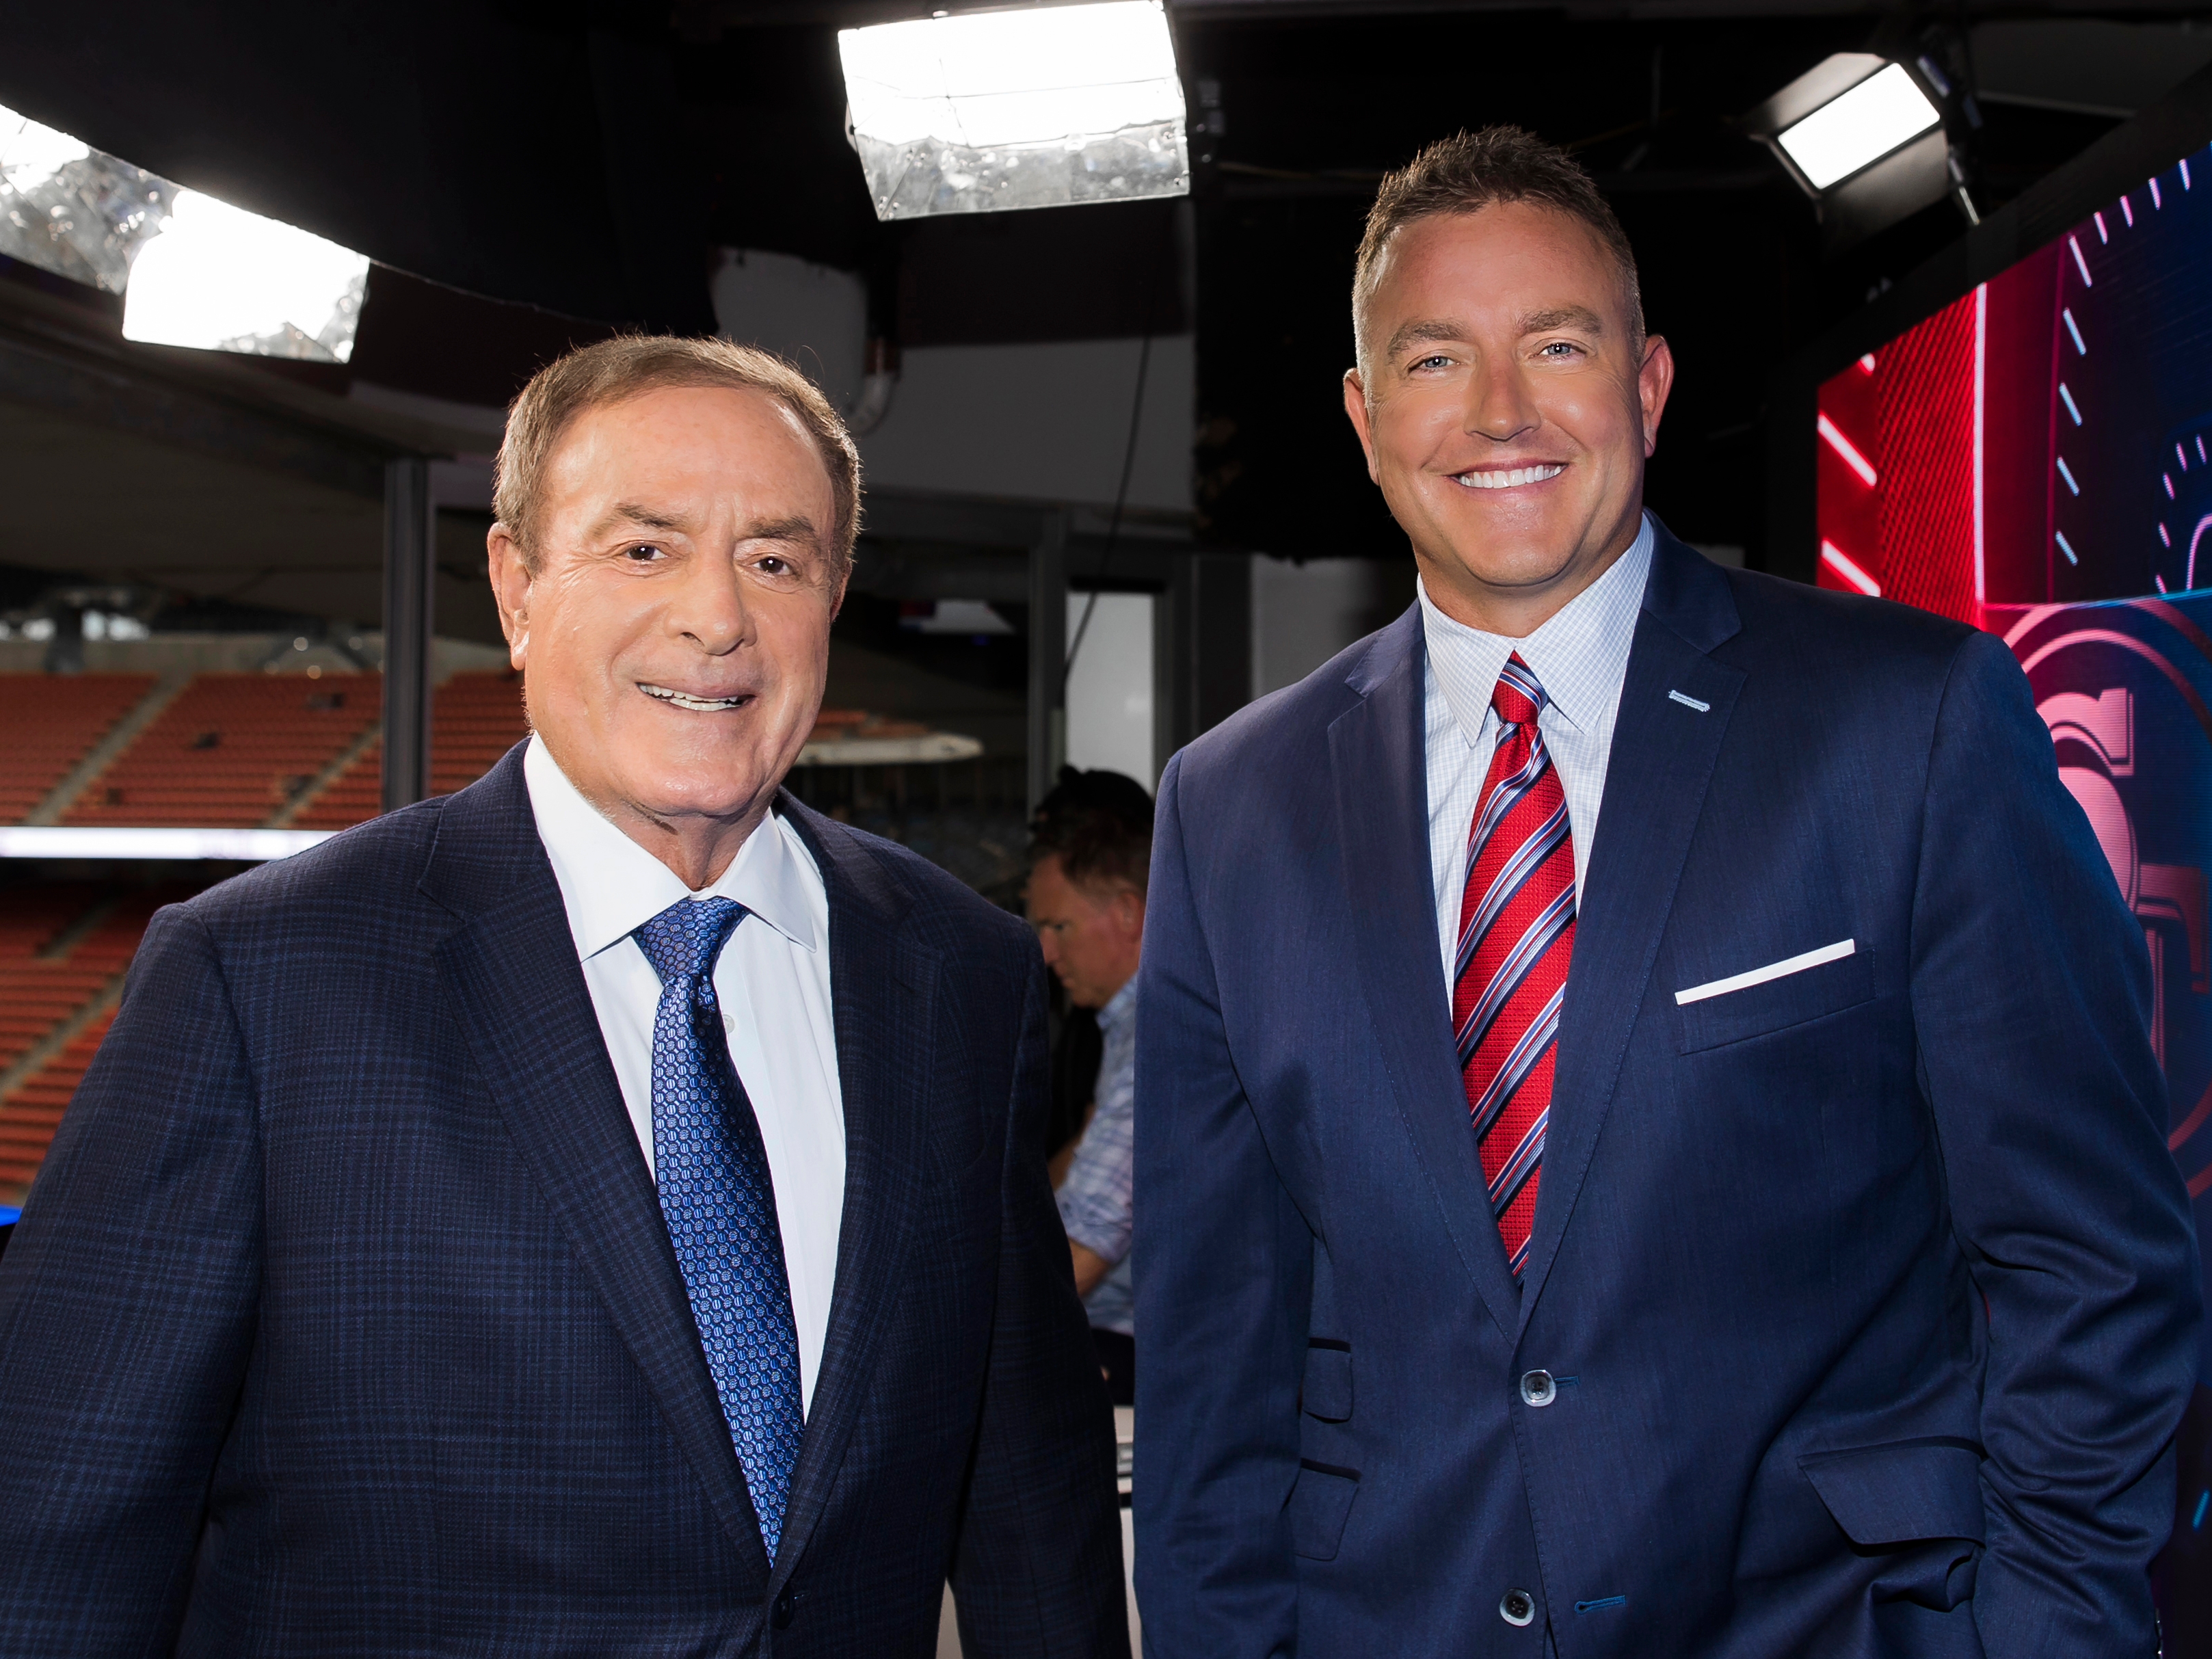 How does play-by-play voice Al Michaels think Thursday Night Football on Amazon Prime is going?